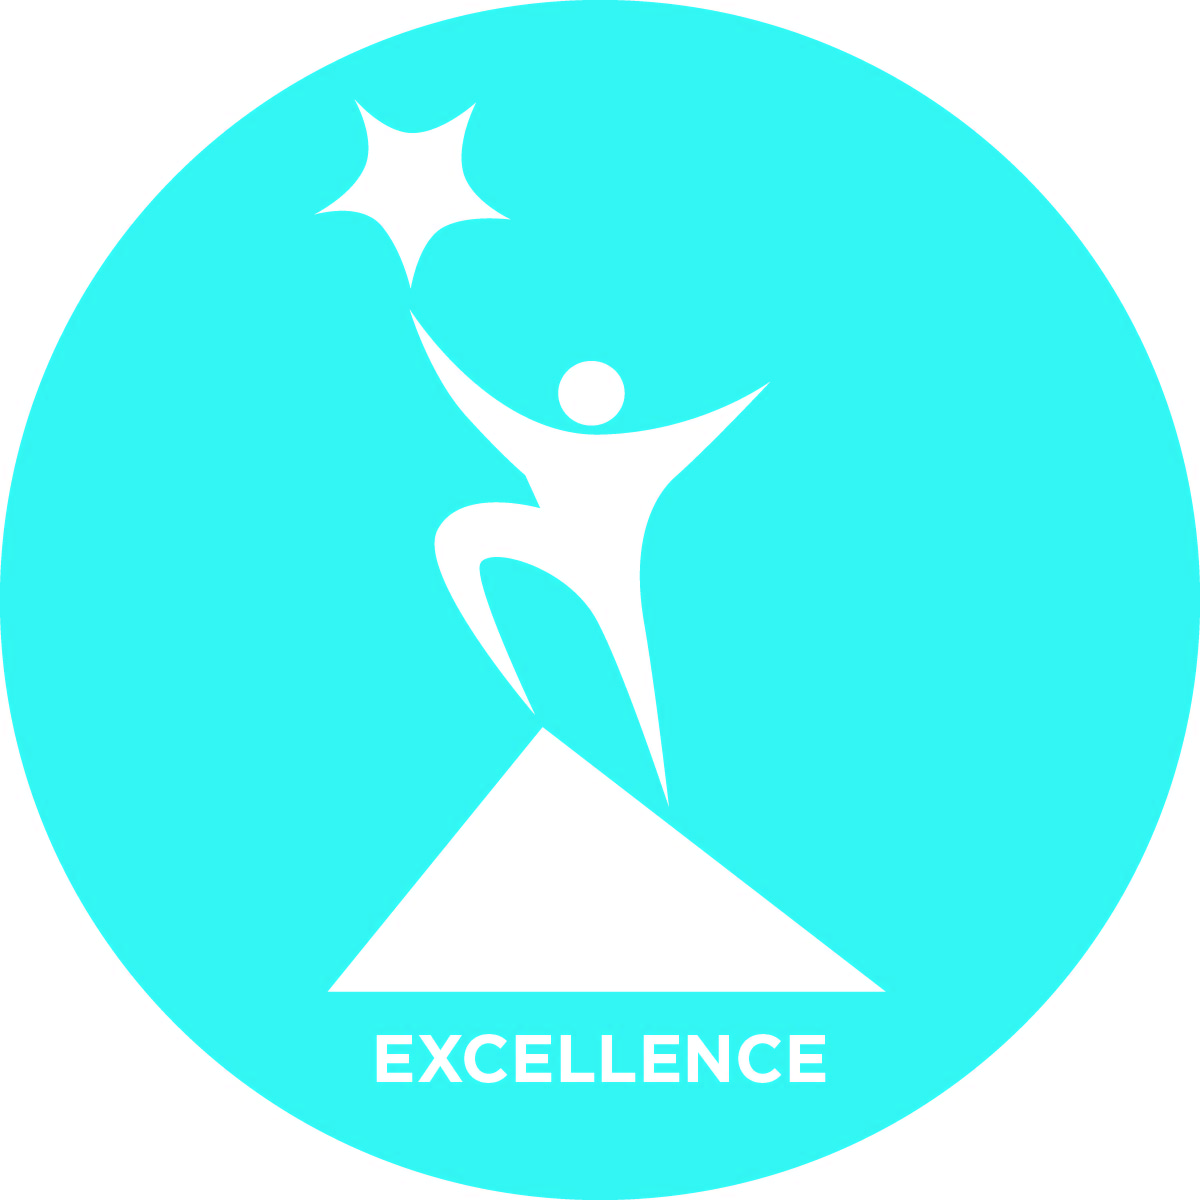 ISPE Core Values - Professional Excellence